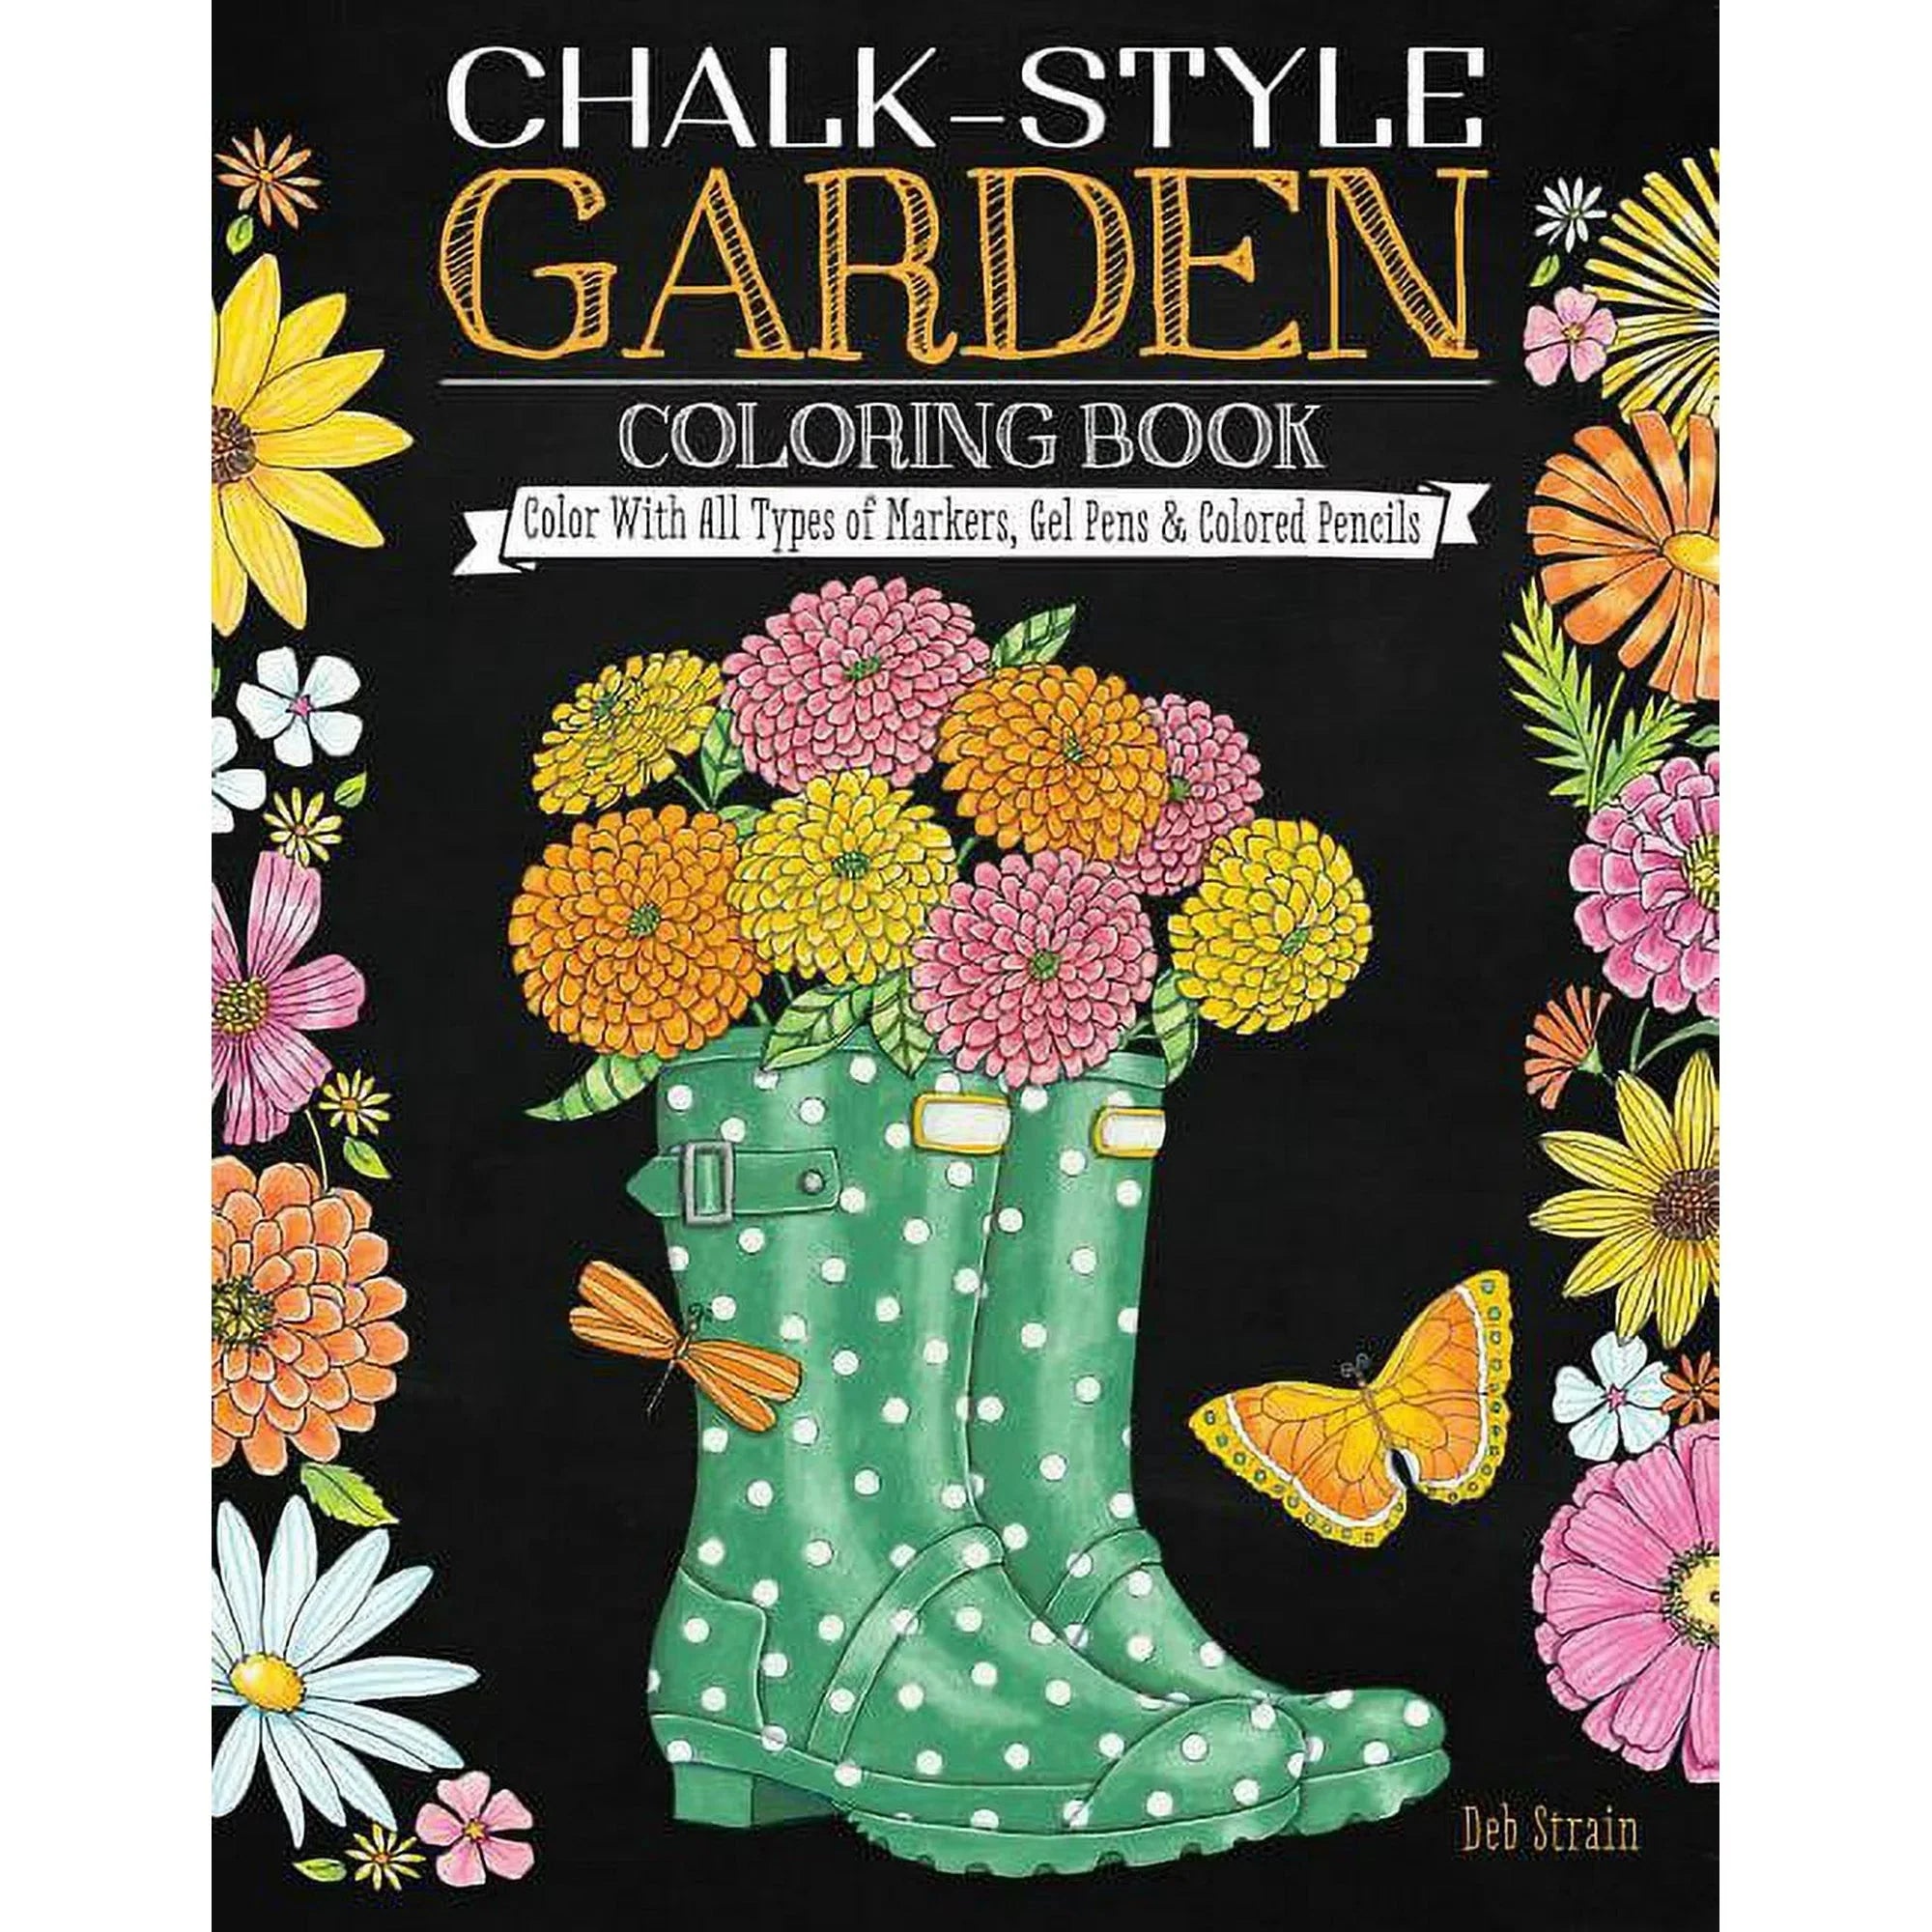 Wholesale prices with free shipping all over United States Chalk-Style Garden Coloring Book: Color With All Types of Markers, Gel Pens Colored Pencils - Steven Deals